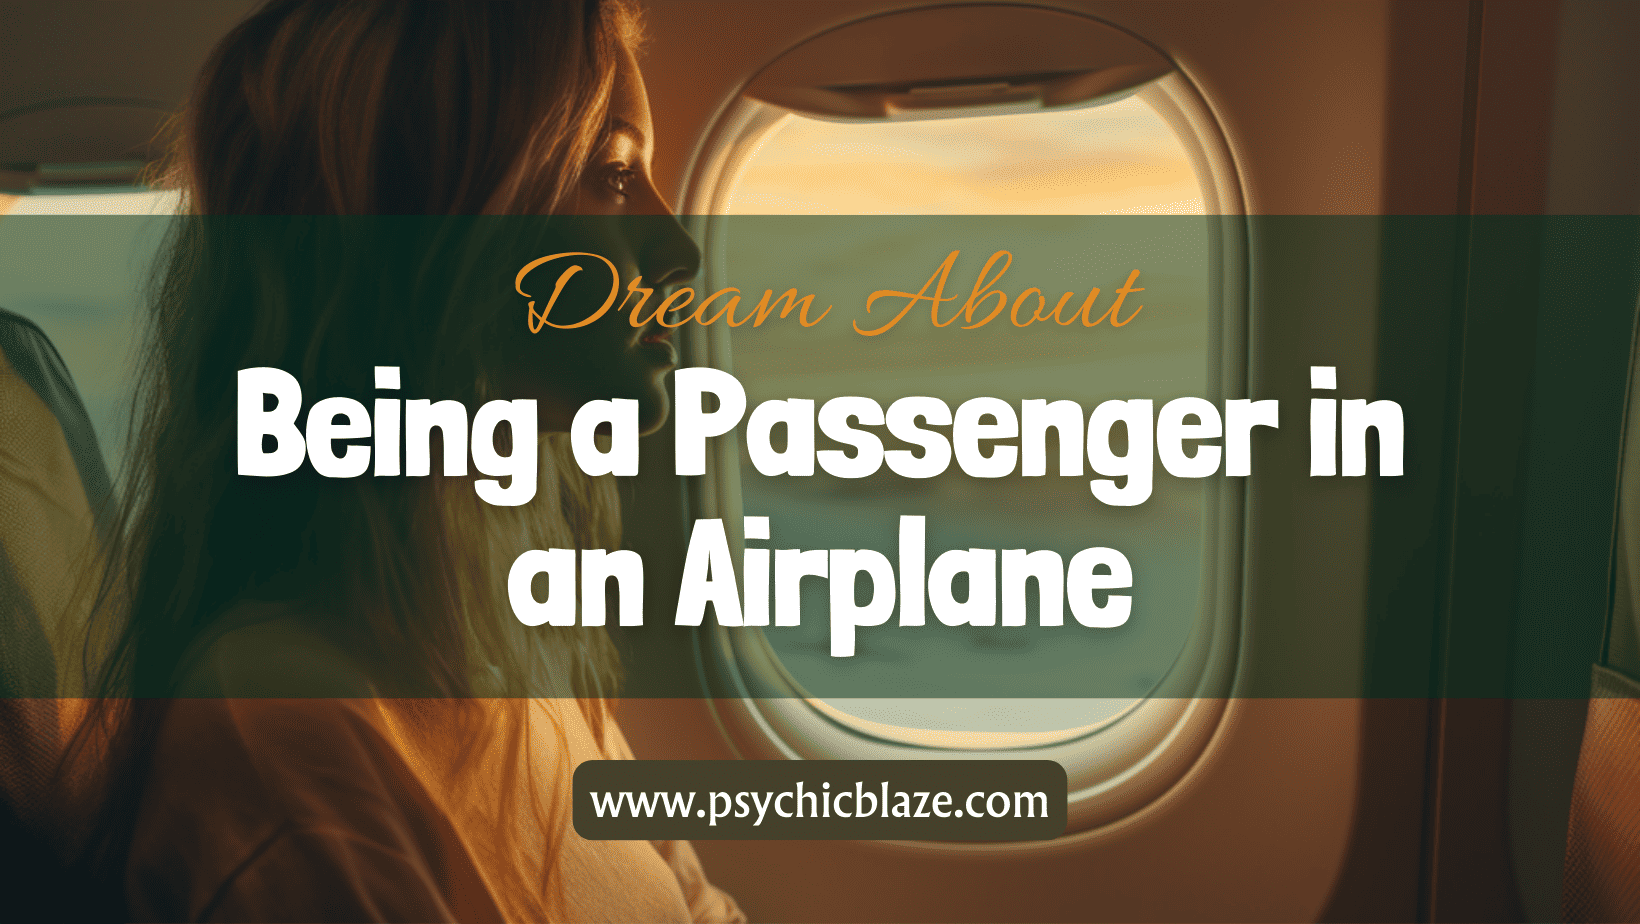 Dream about Being a Passenger in an Airplane